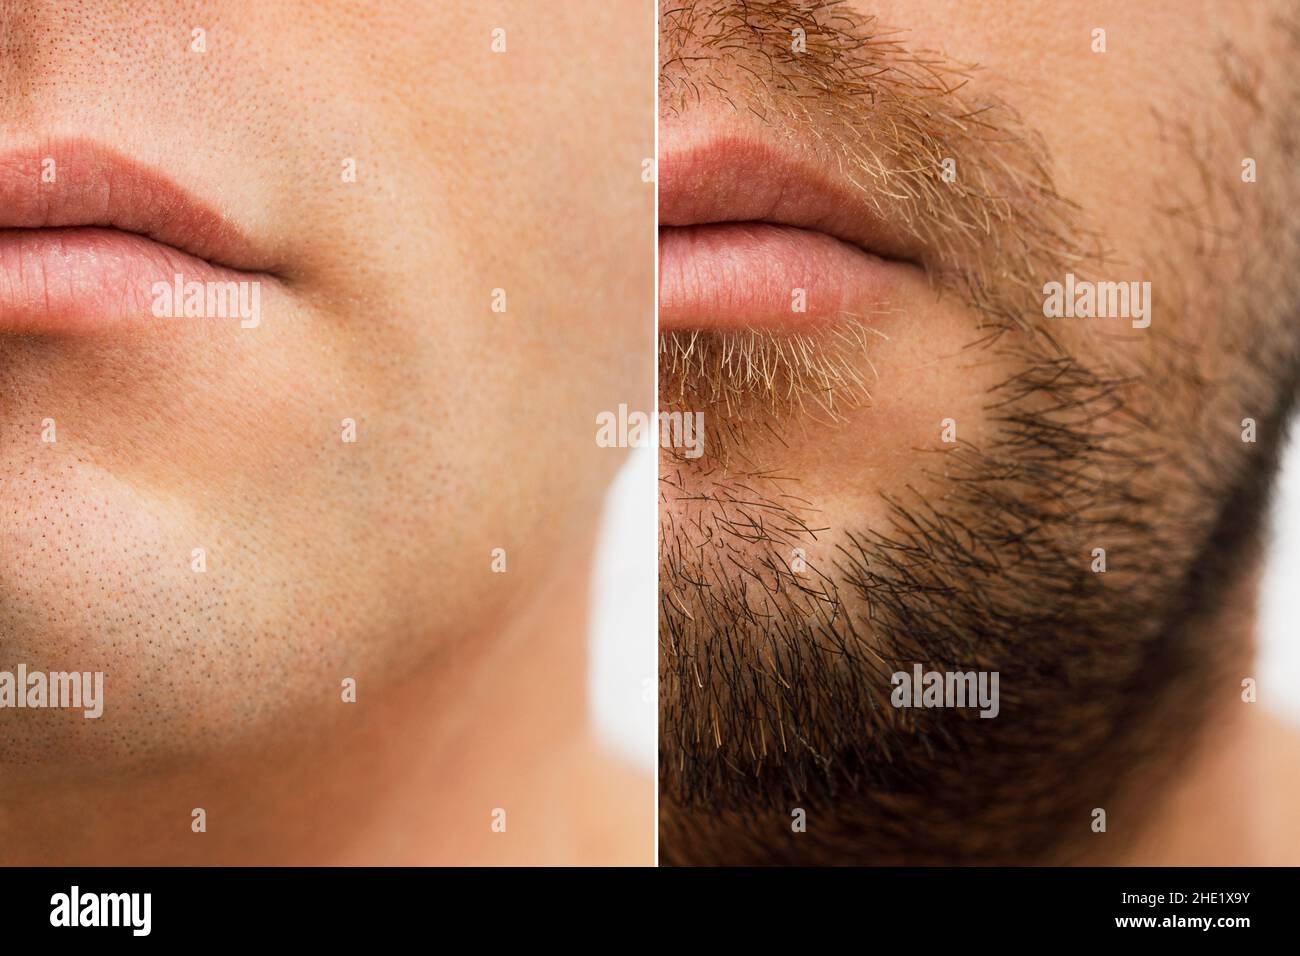 Close up photo of a man's face before and after shaving. a young man with a beard. Comparison of a man's face with a beard and without a beard. use of Stock Photo